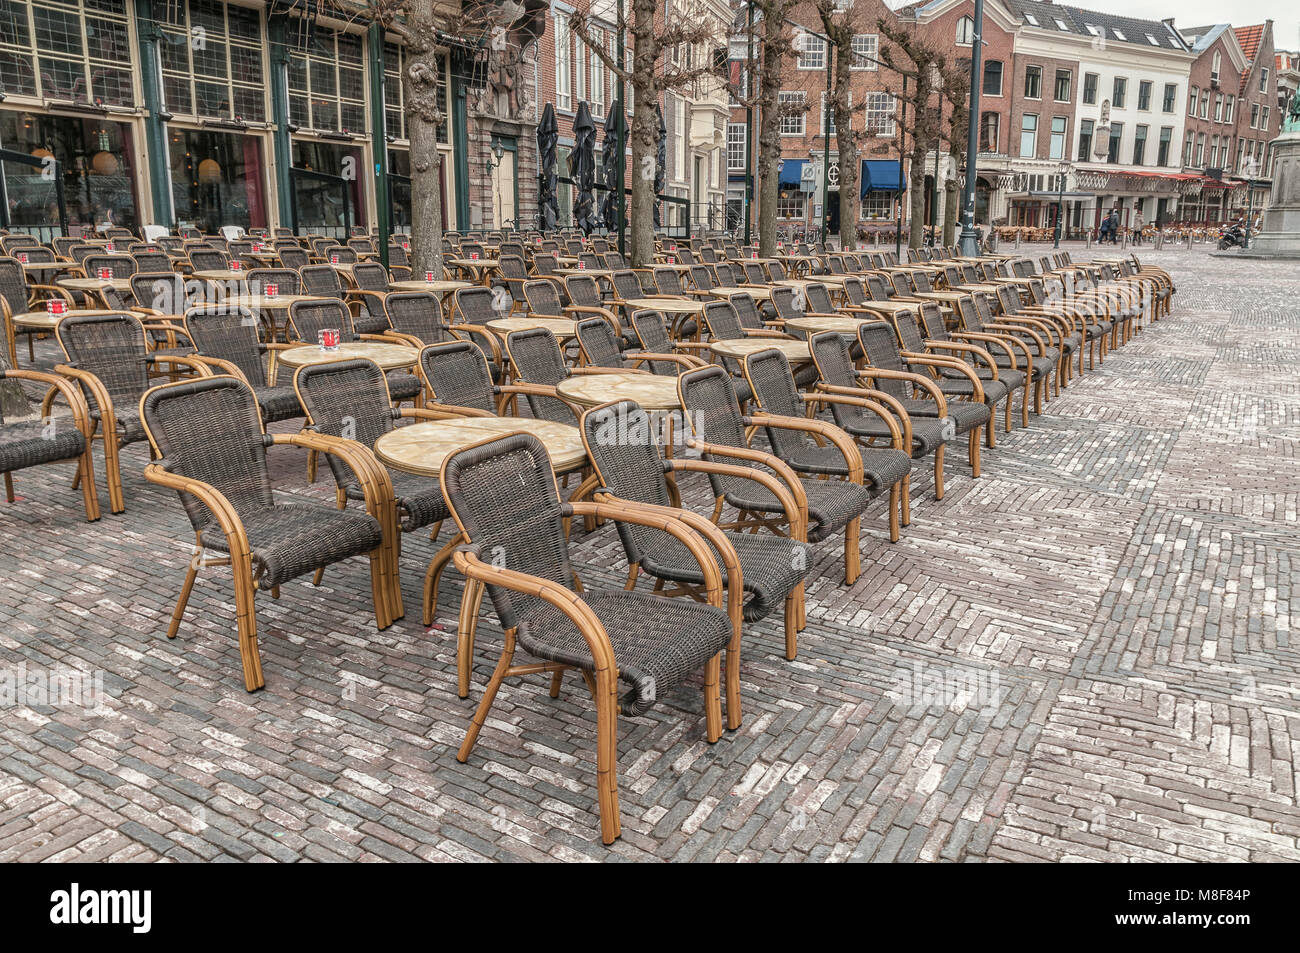 market square with many wicker chairs for a large restaurant Stock Photo